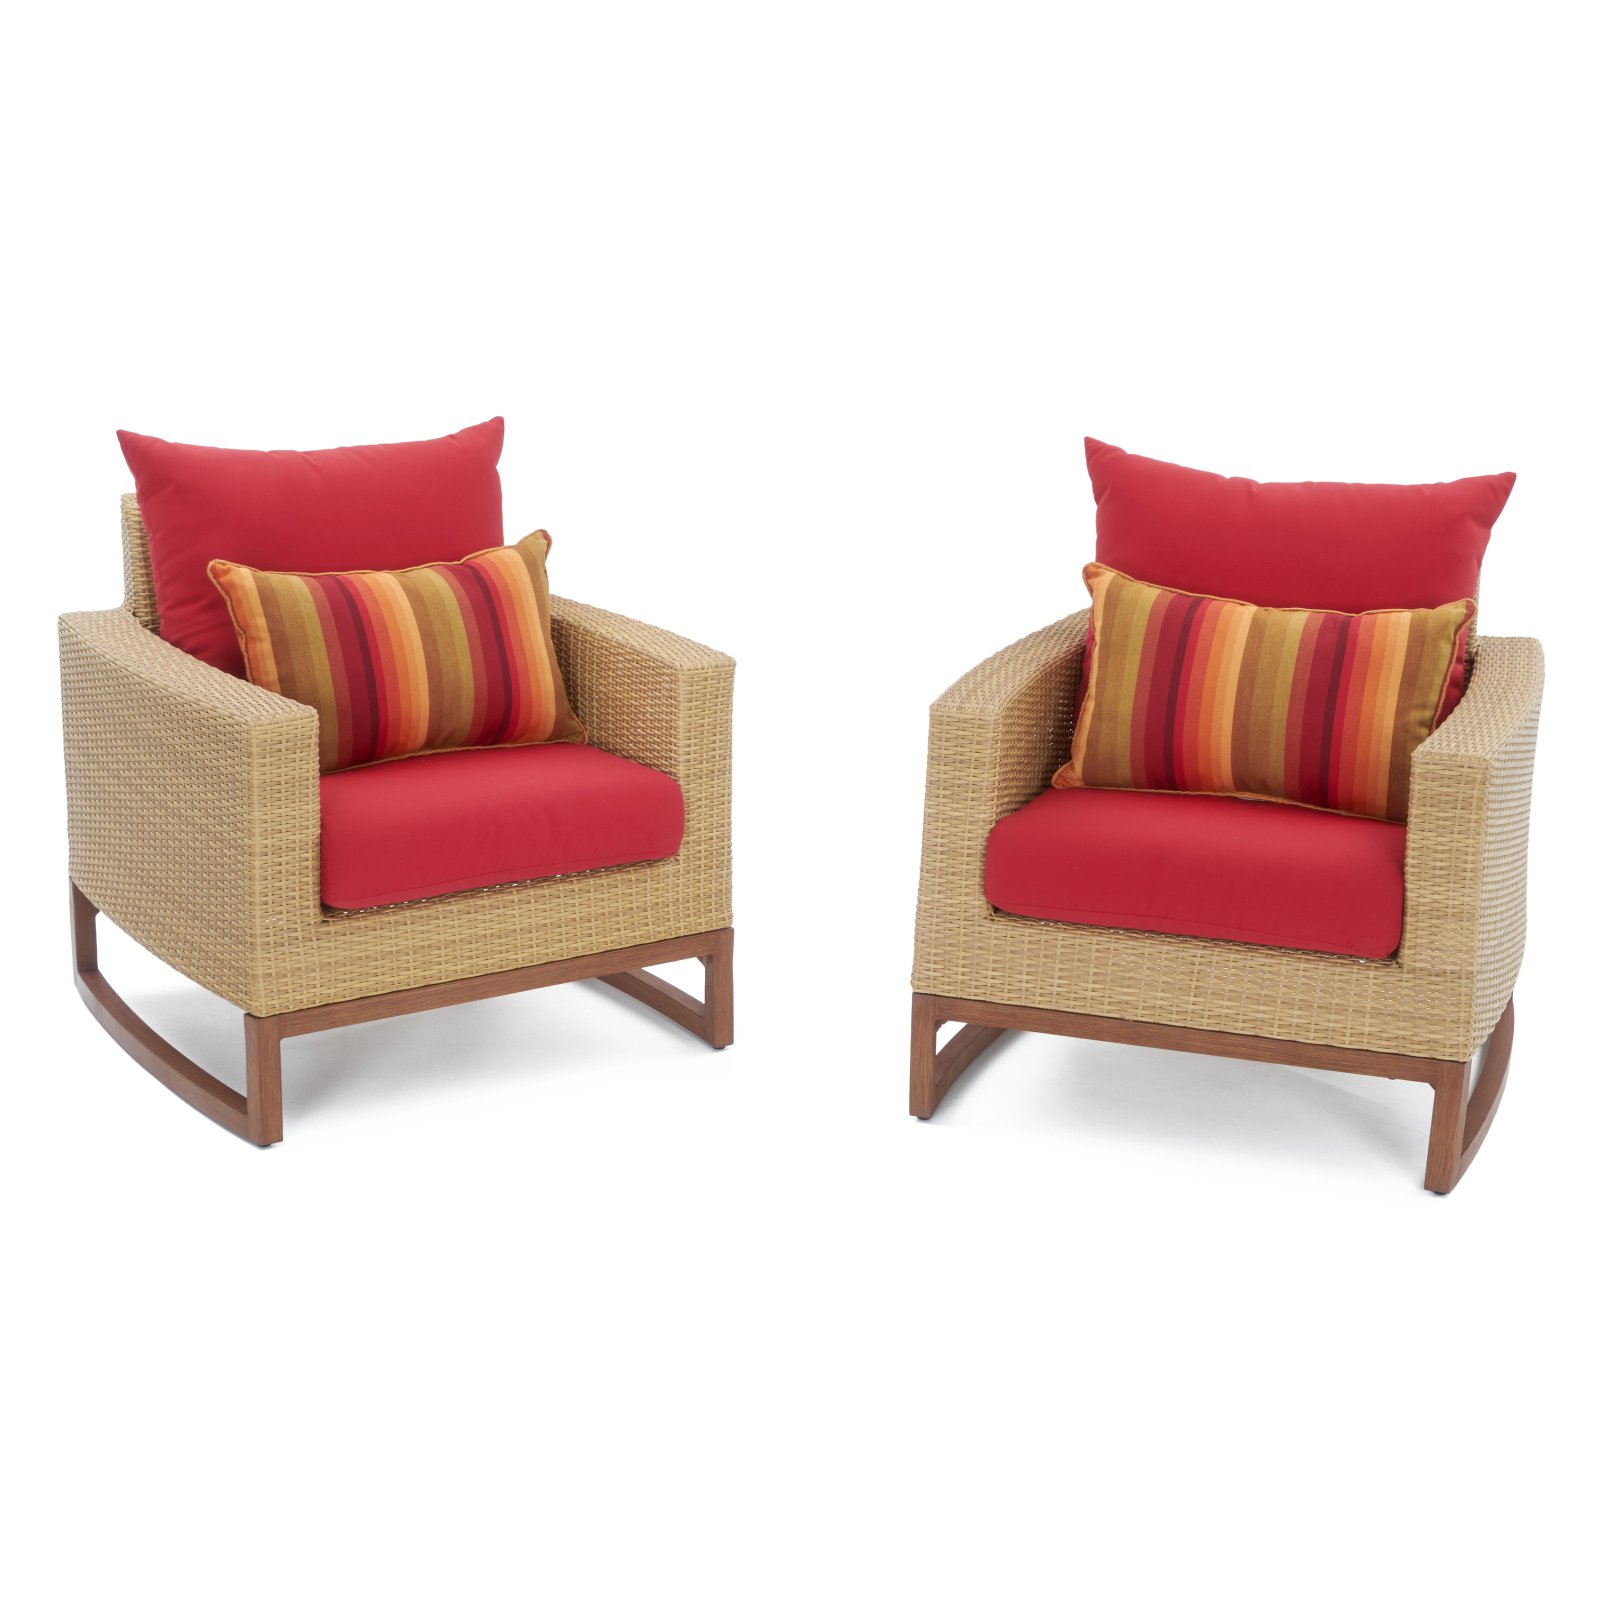 RST Brands Mili 2 Piece Aluminum & Resin Wicker Outdoor Club Chairs - Sunset Red - image 1 of 7